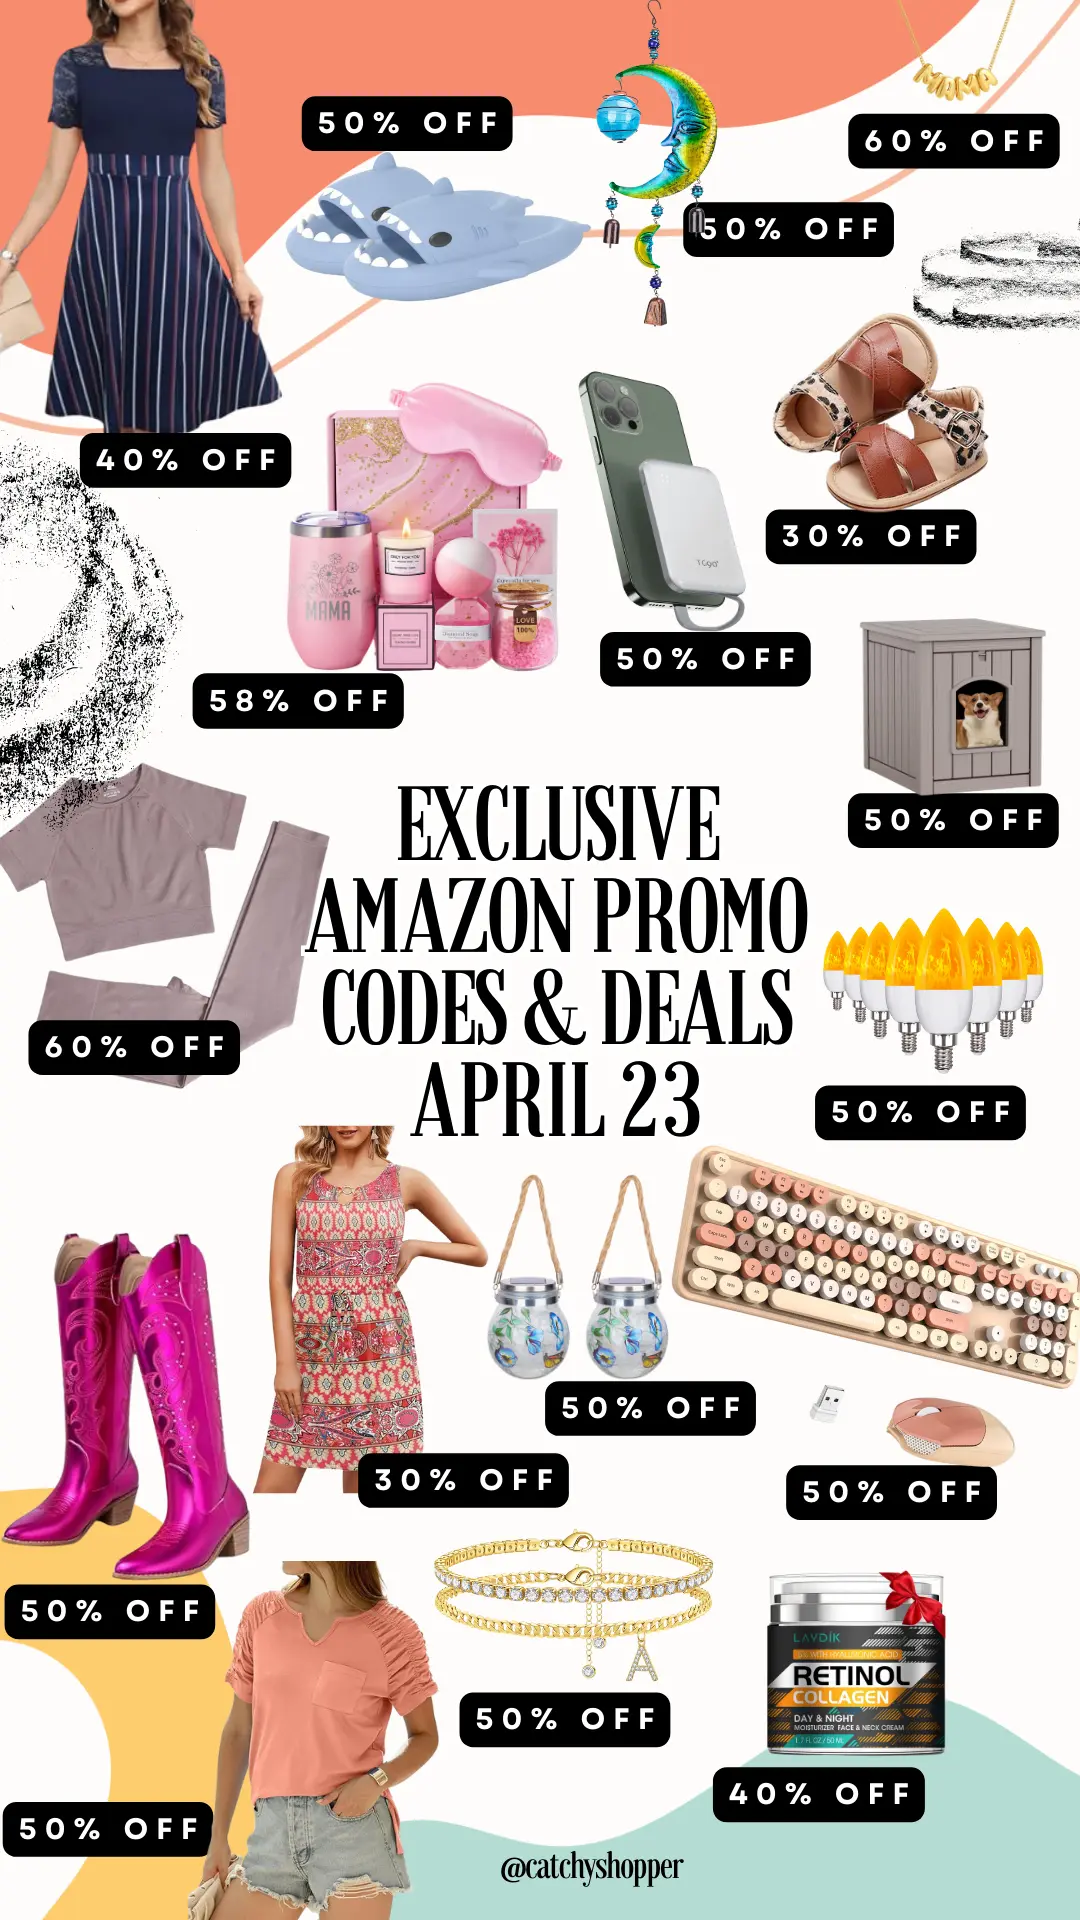 EXCLUSIVE Amazon Deals and Codes: Your Daily Savings for April 23